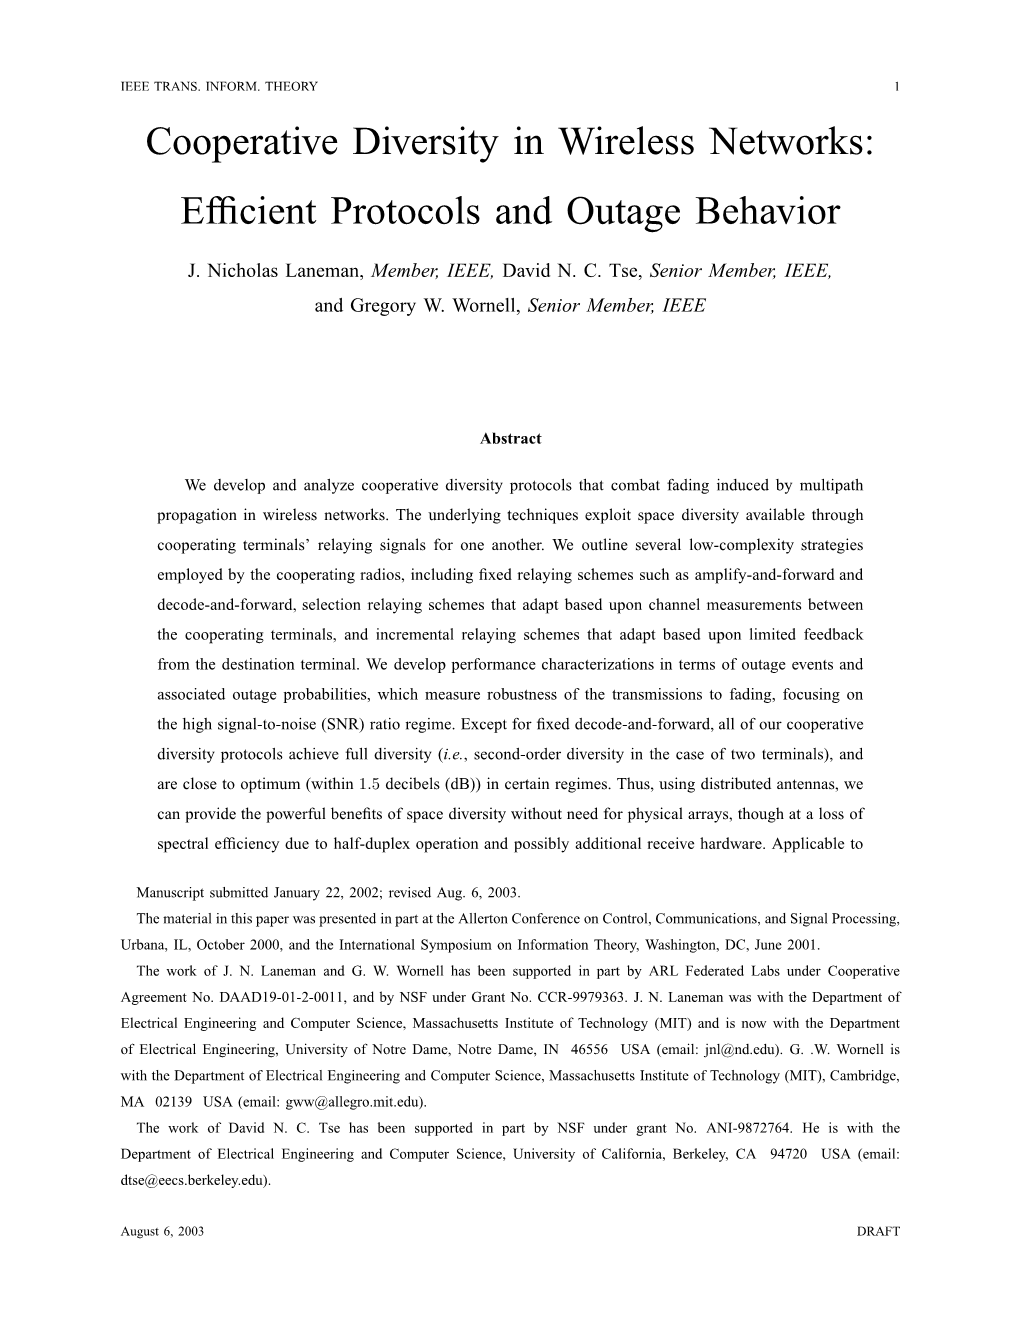 Cooperative Diversity in Wireless Networks: Efﬁcient Protocols and Outage Behavior